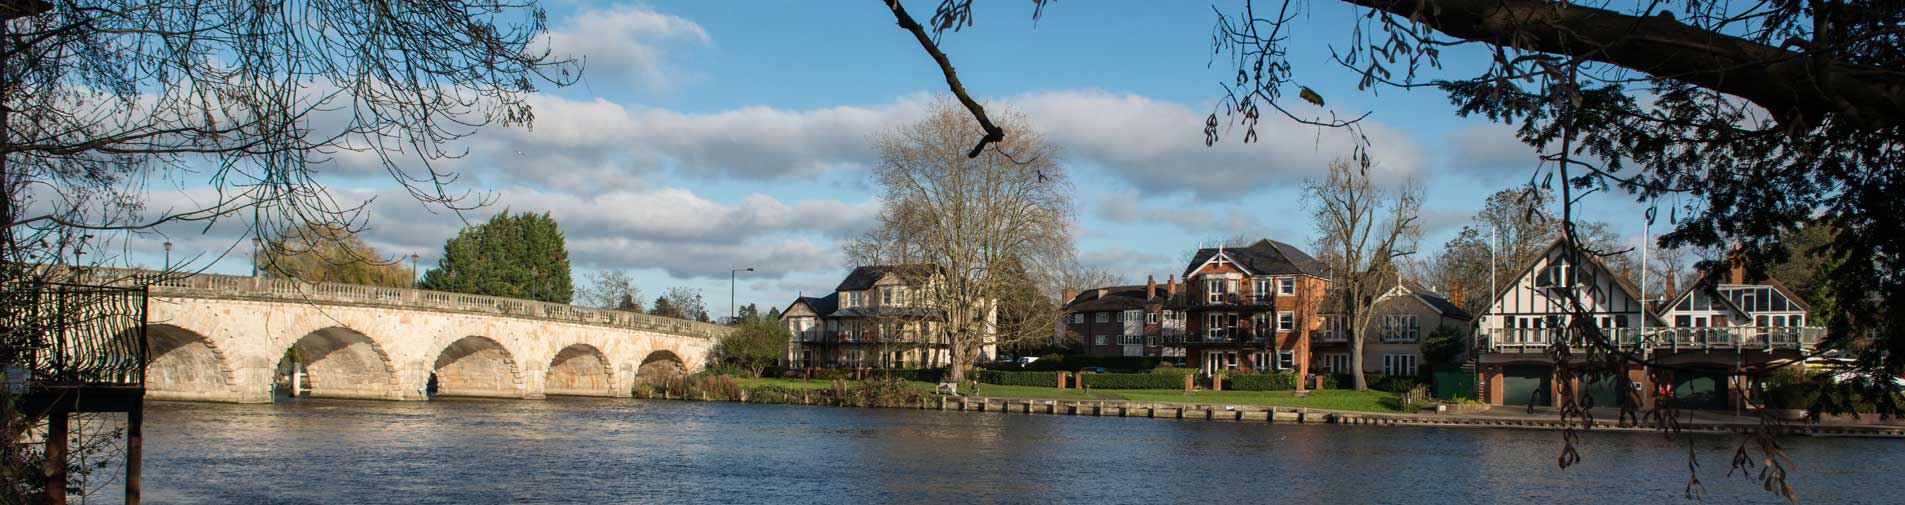 retirement homes in maidenhead location page